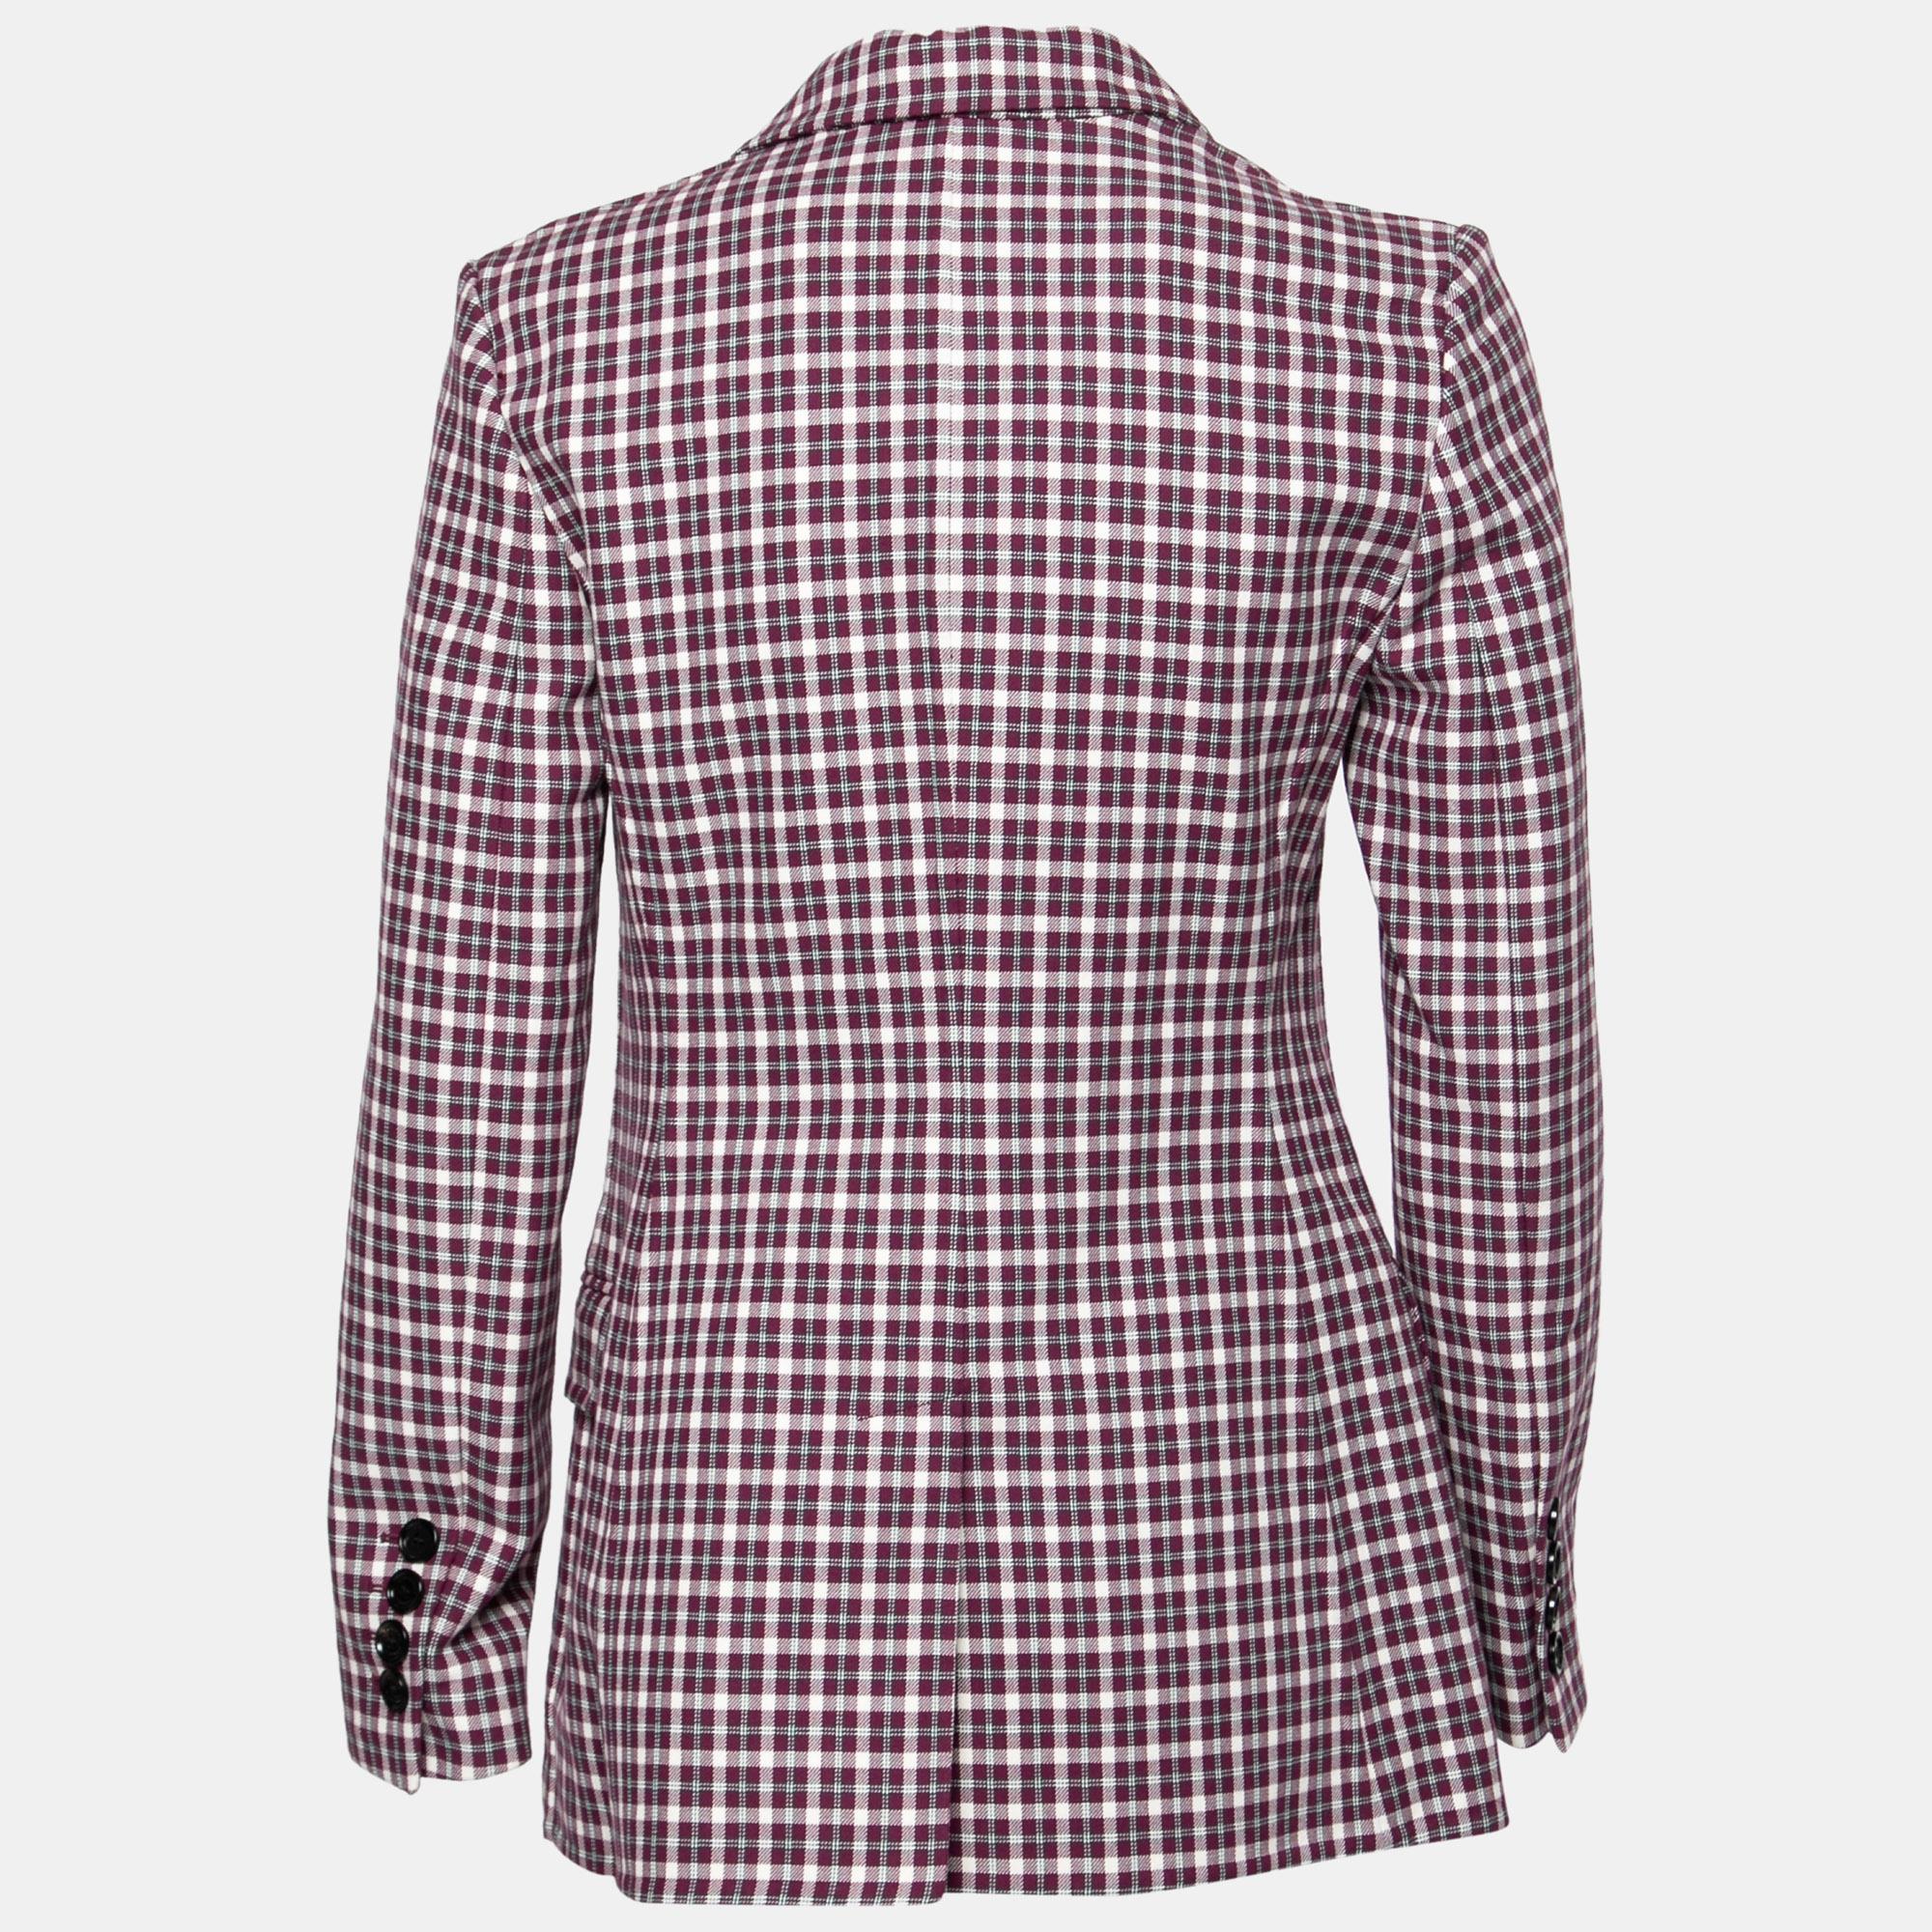 Fashionable and functional, this jacket from the House of Burberry helps you sport a sophisticated style while wearing it. Tailored using burgundy cotton fabric and embellished with checkered prints, this jacket exhibits buttoned closures and long